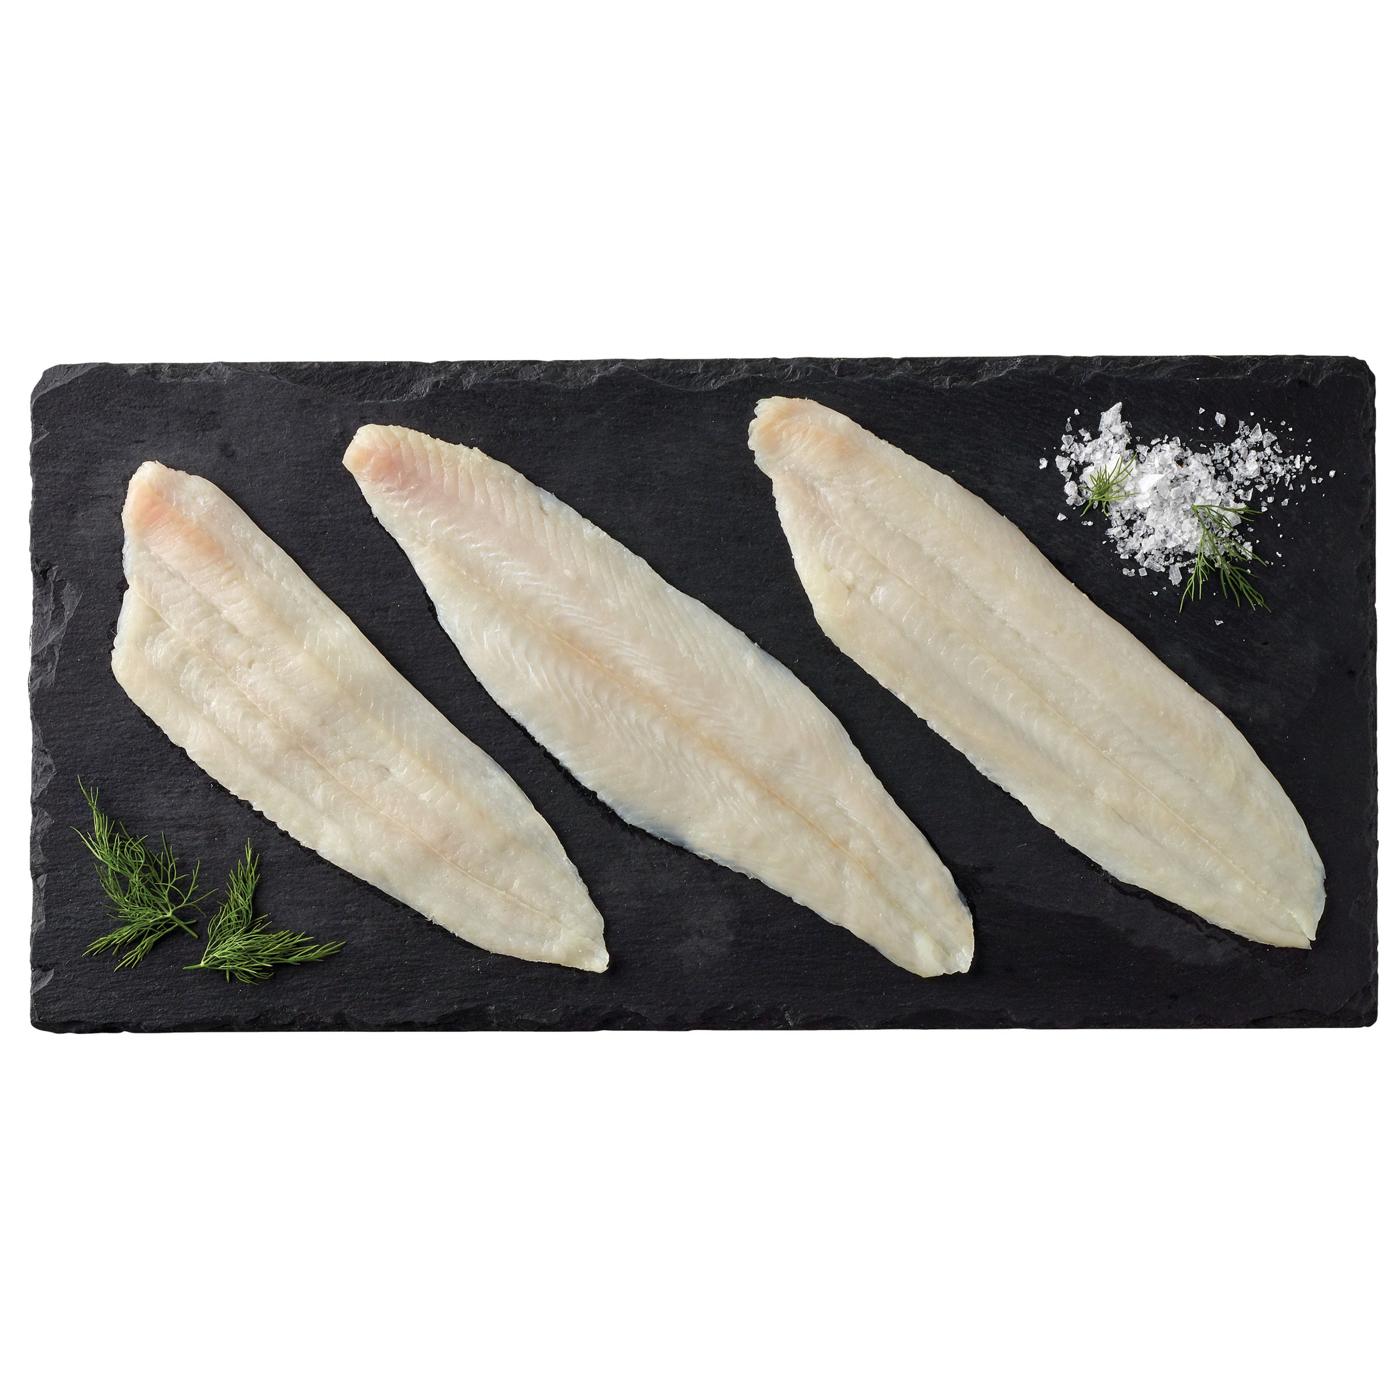 H-E-B Wild Caught Fresh Dover Sole Fillet; image 1 of 2